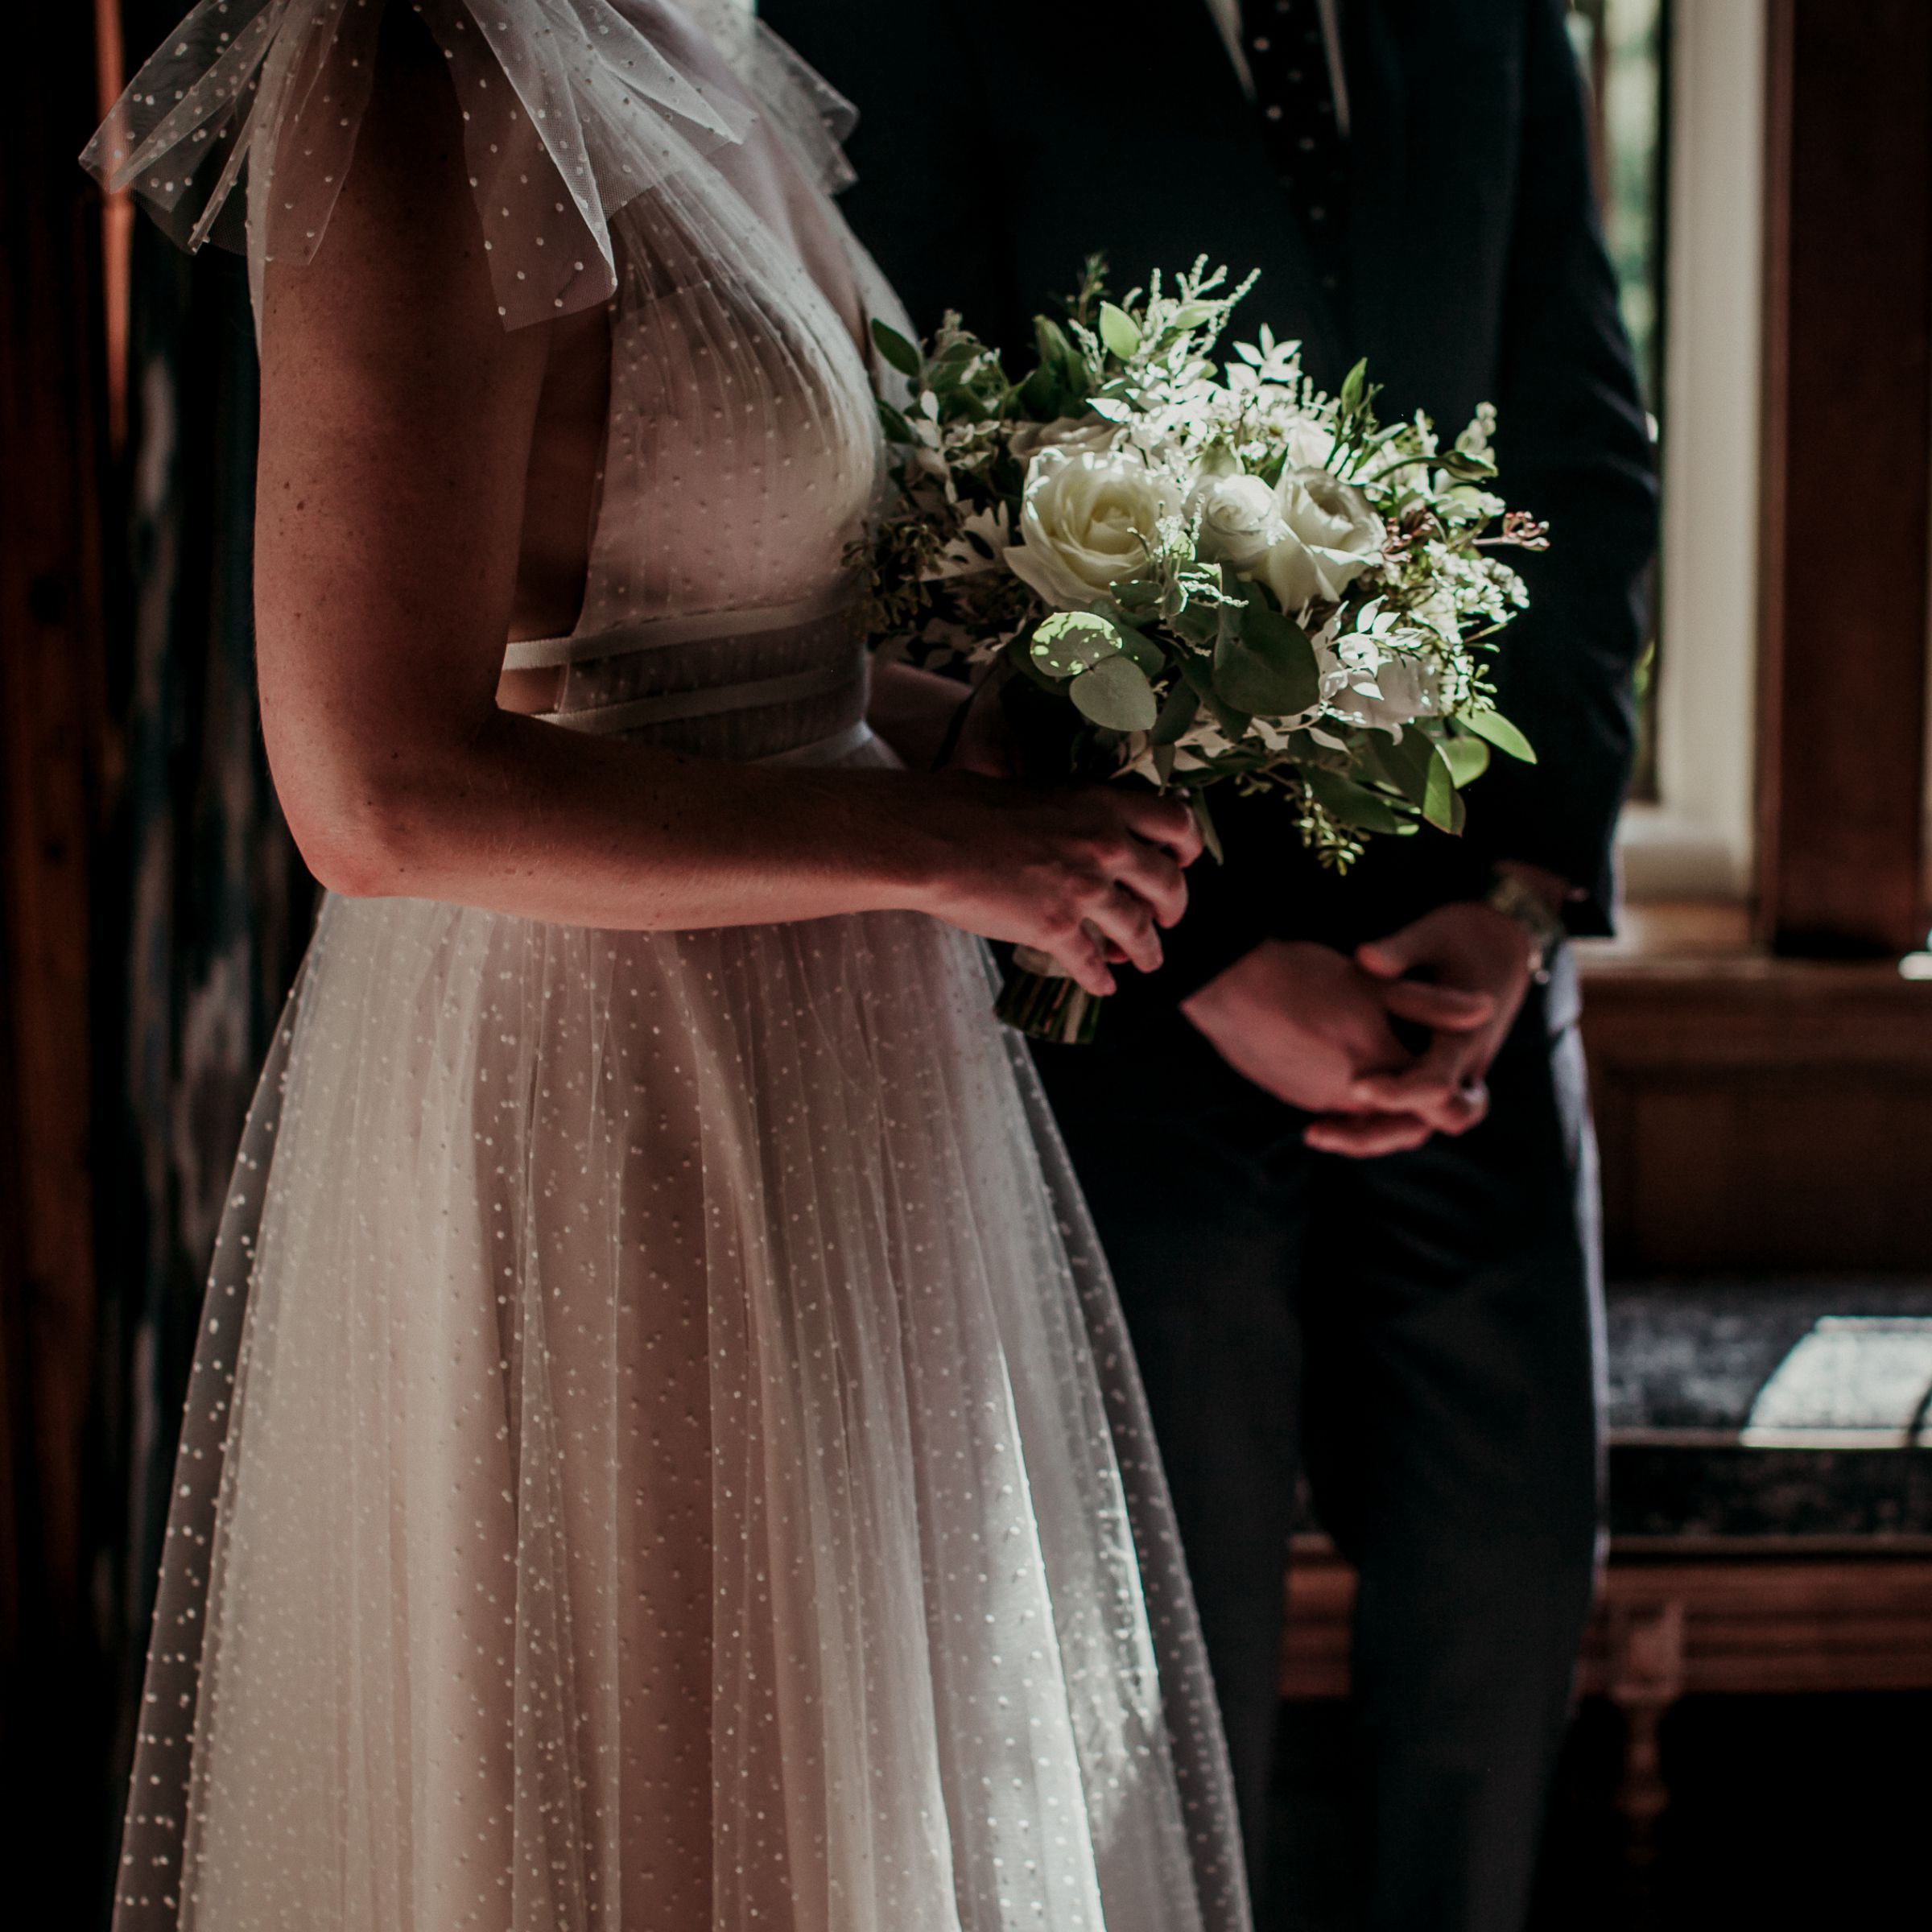 Body shot of married couple with flowers and attire 